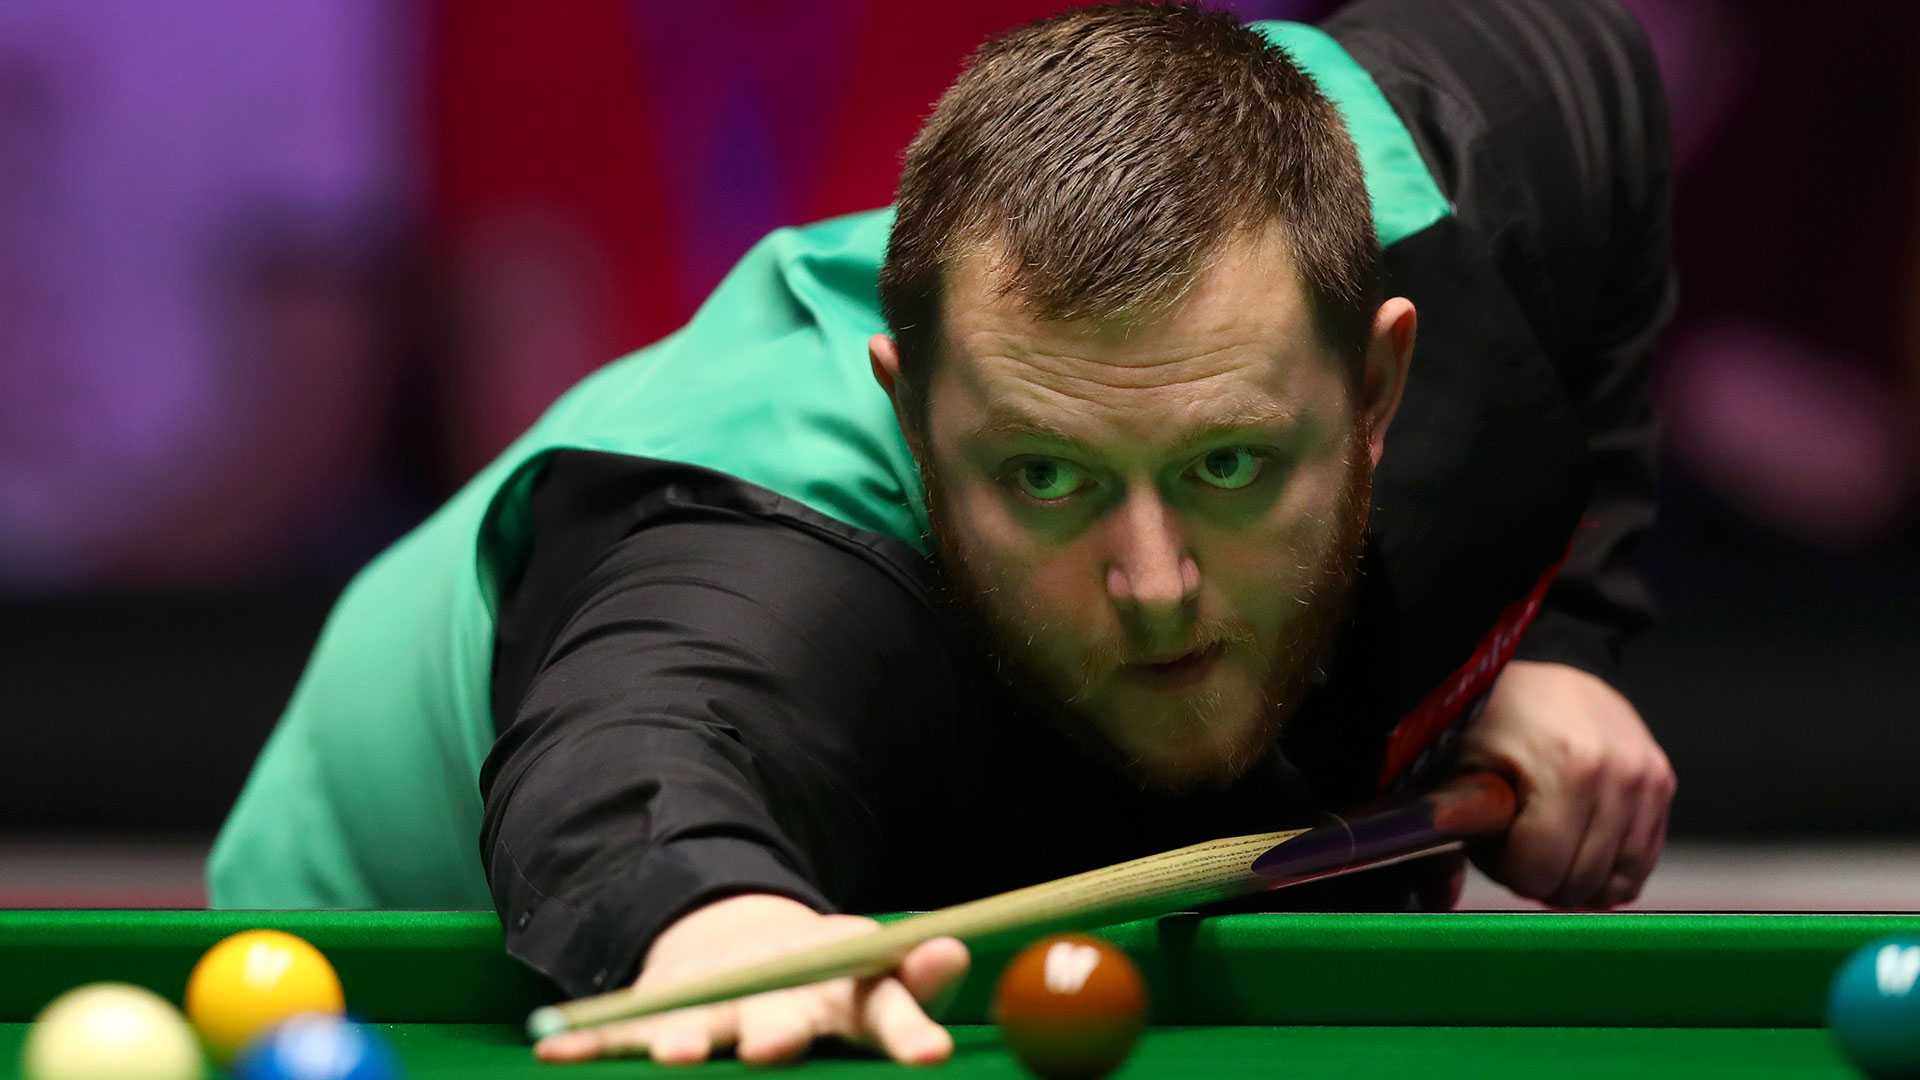 Tour Championship snooker results Mark Allen 9-2 Mark Selby heading into evening session